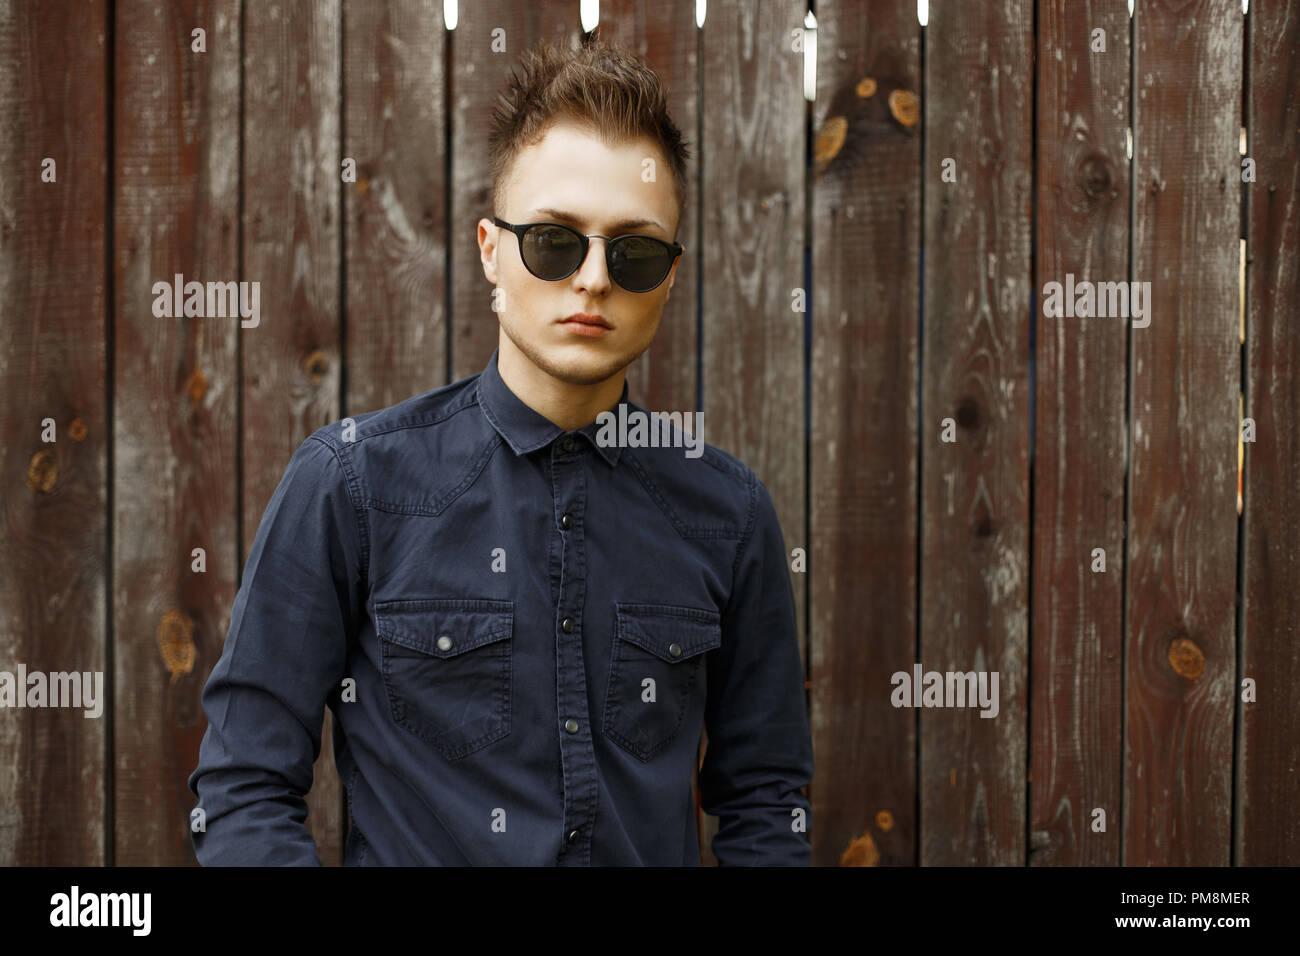 Vintage portrait of a young man in sunglasses and a blue shirt near an old wooden wall Stock Photo